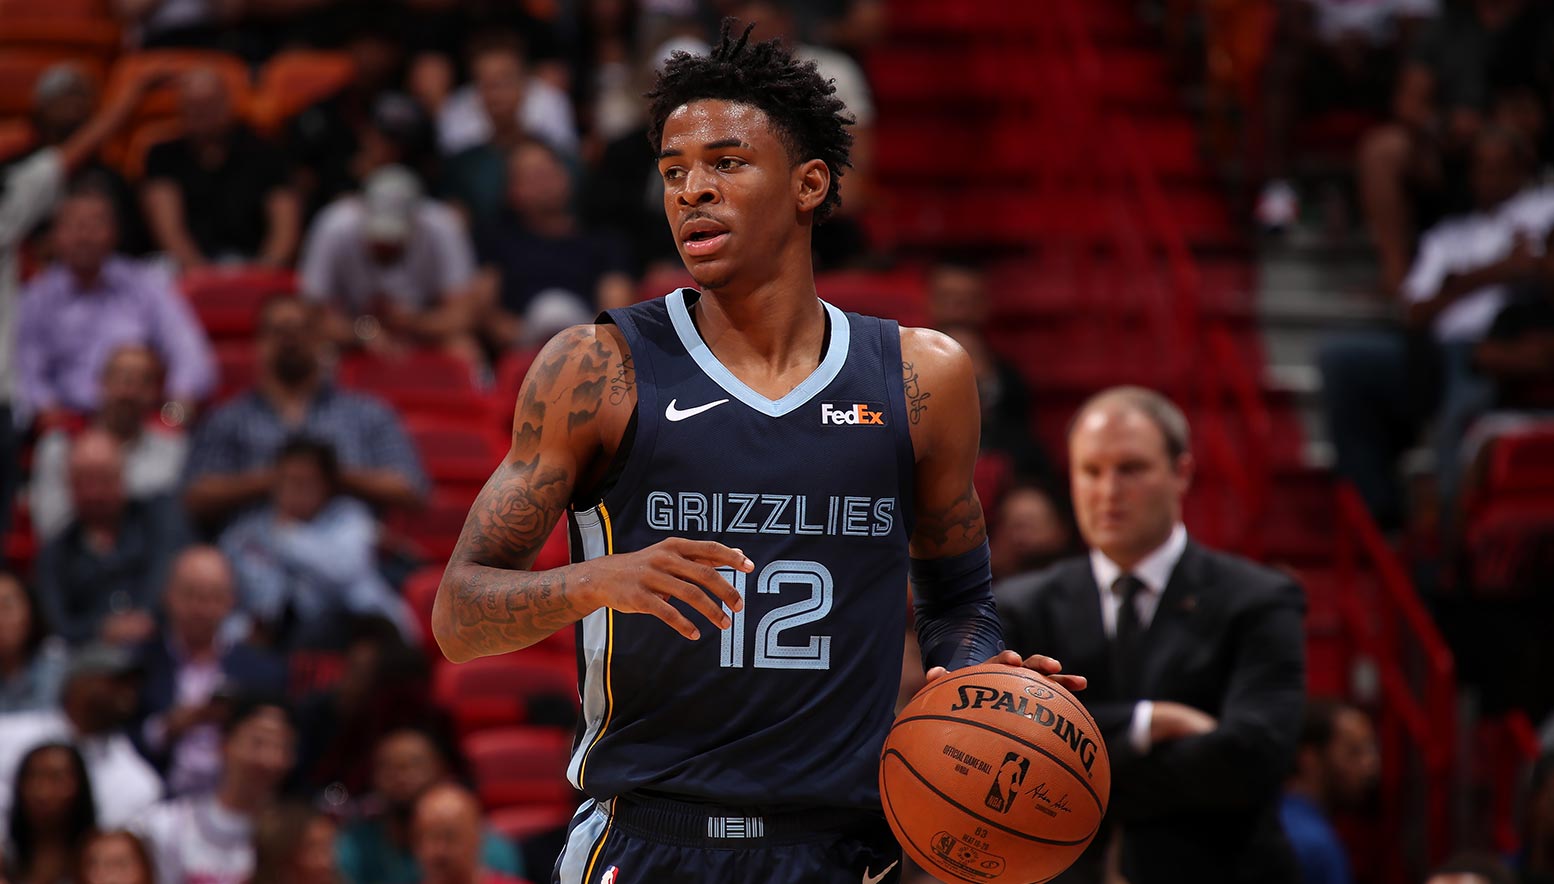 Ja Morant #12 of the Memphis Grizzlies handles the ball against the Miami Heat at American Airlines Arena